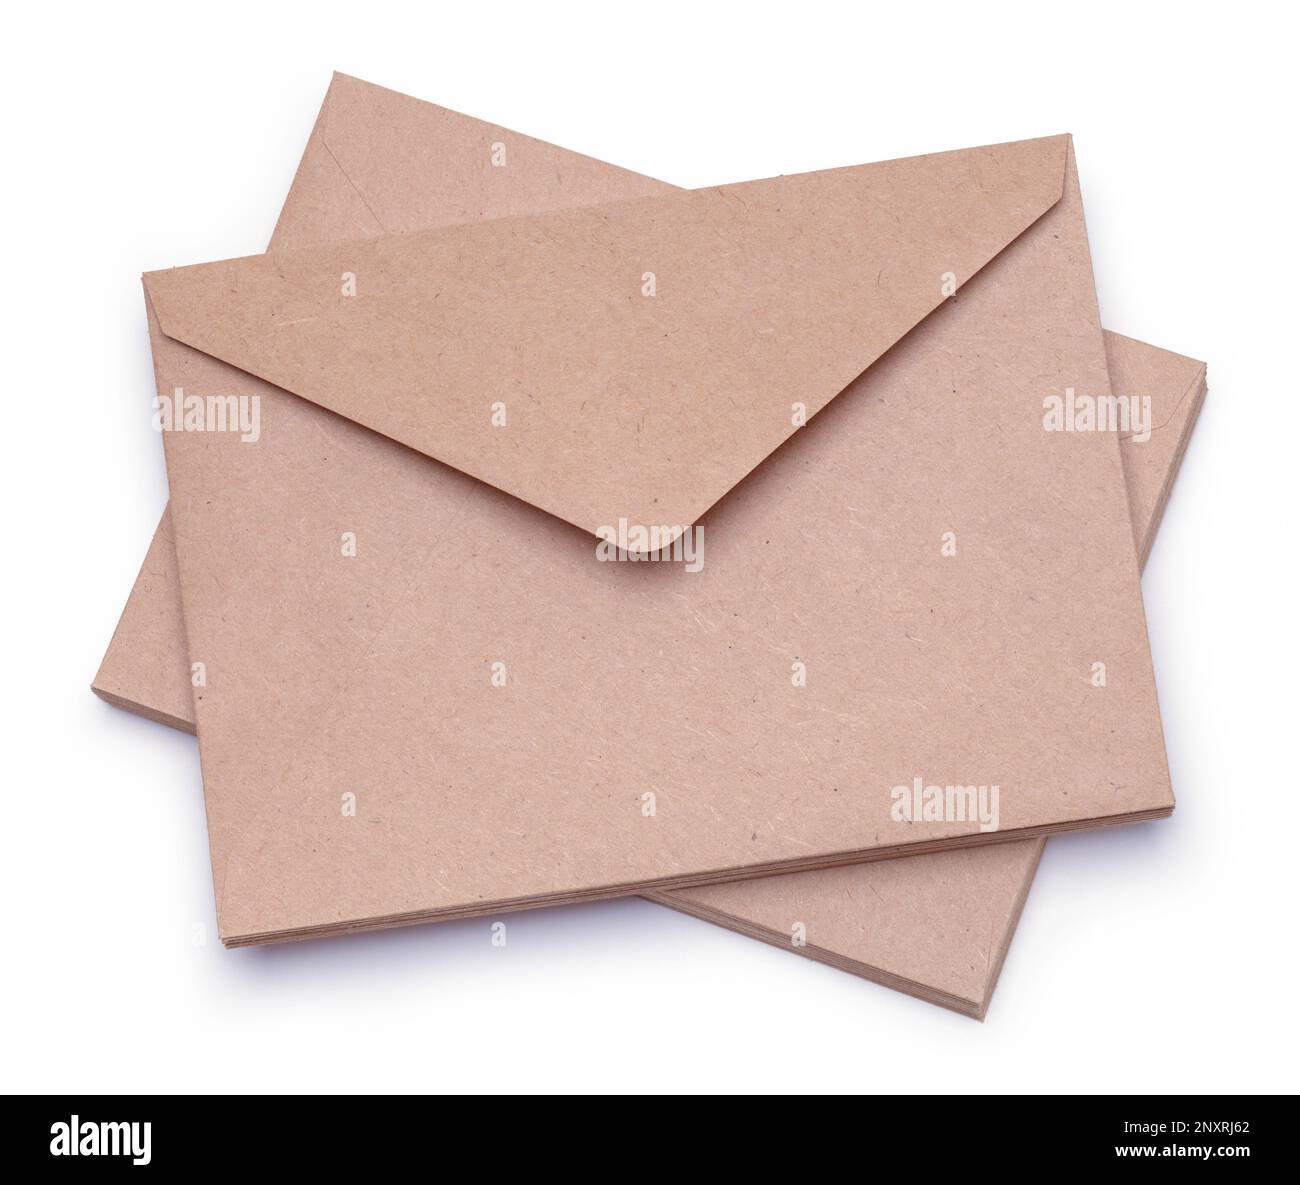 Split Stack of Brown Envelopes Cut Out on White. Stock Photo